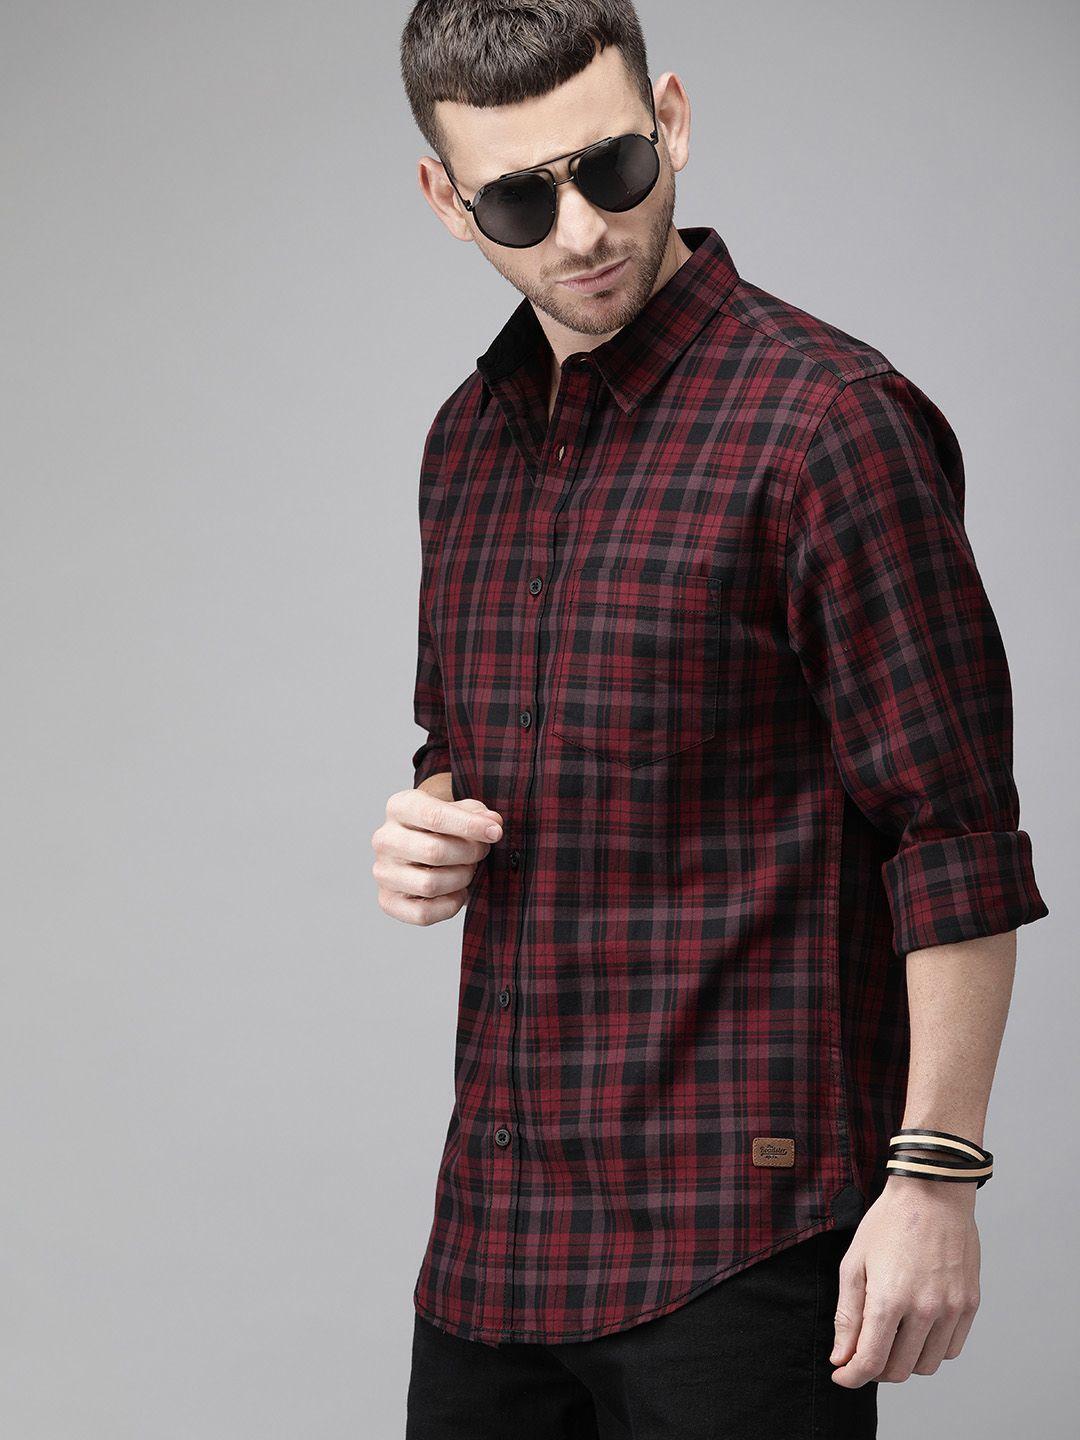 roadster-men-maroon-&-black-checked-pure-cotton-sustainable-casual-shirt